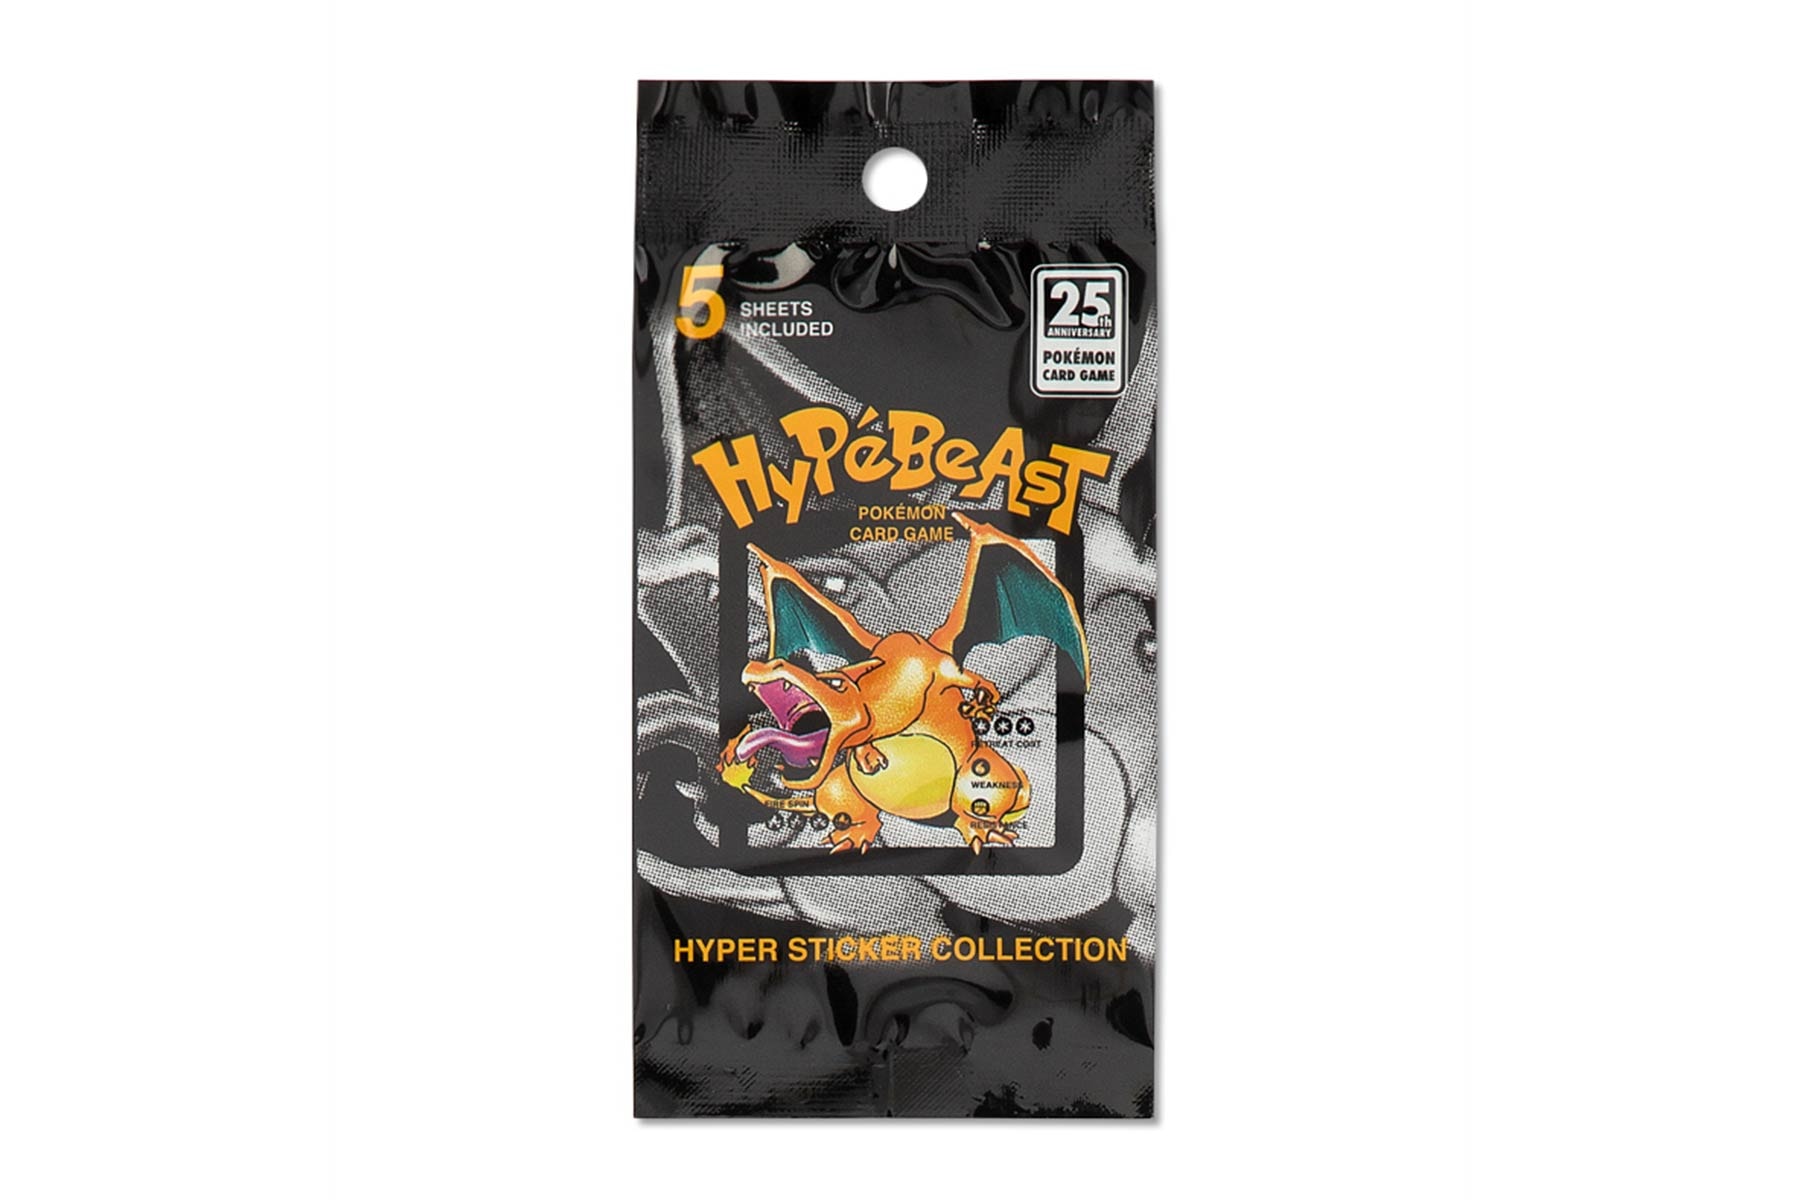 HYPEBEAST Pokémon TCG 25th Anniversary Capsule Collaboration Hoodies Phone Cases Release Where to buy